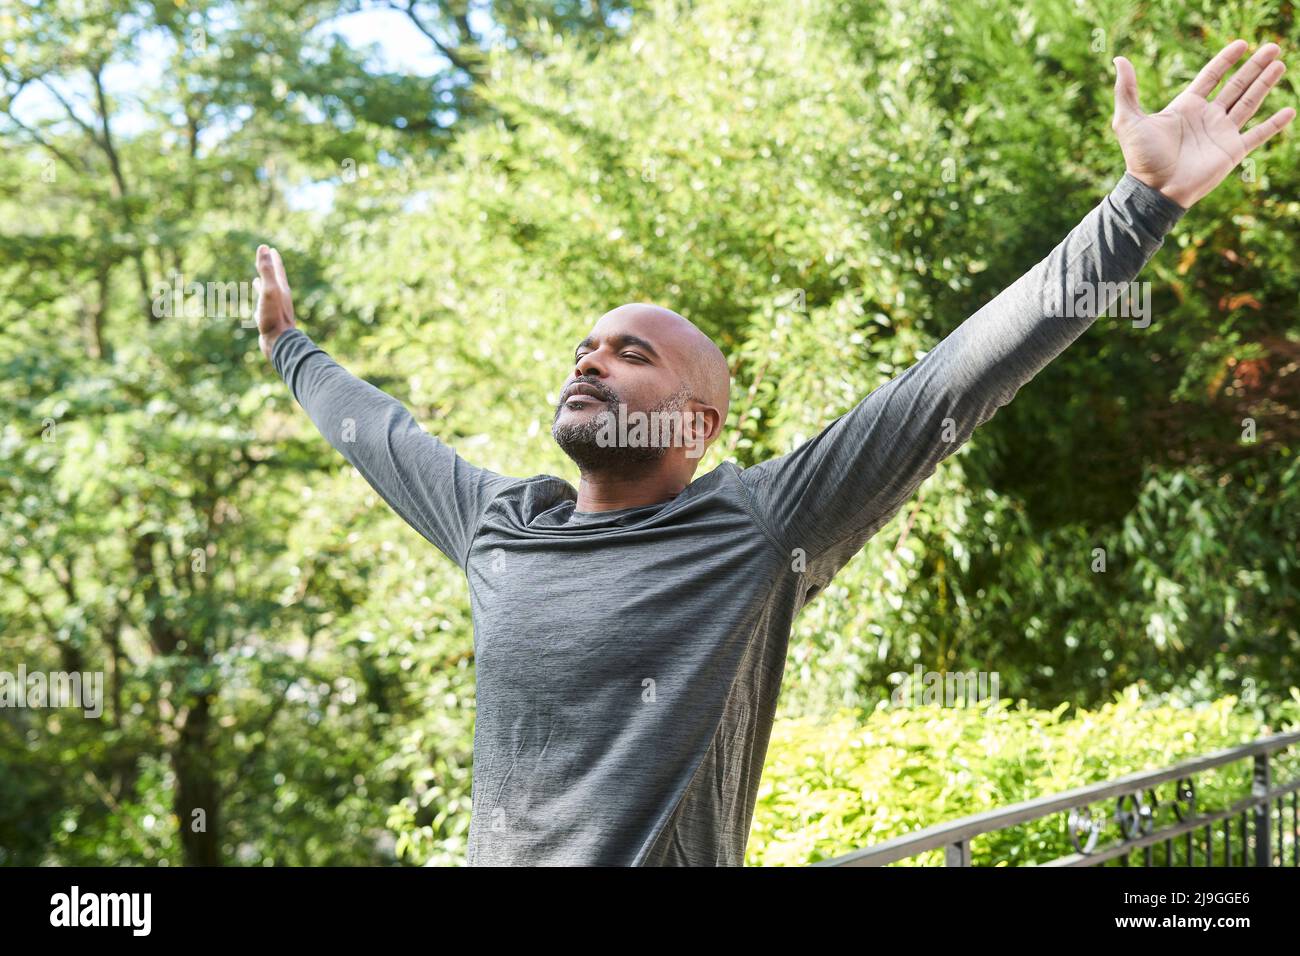 Man stretching his arms Stock Photo